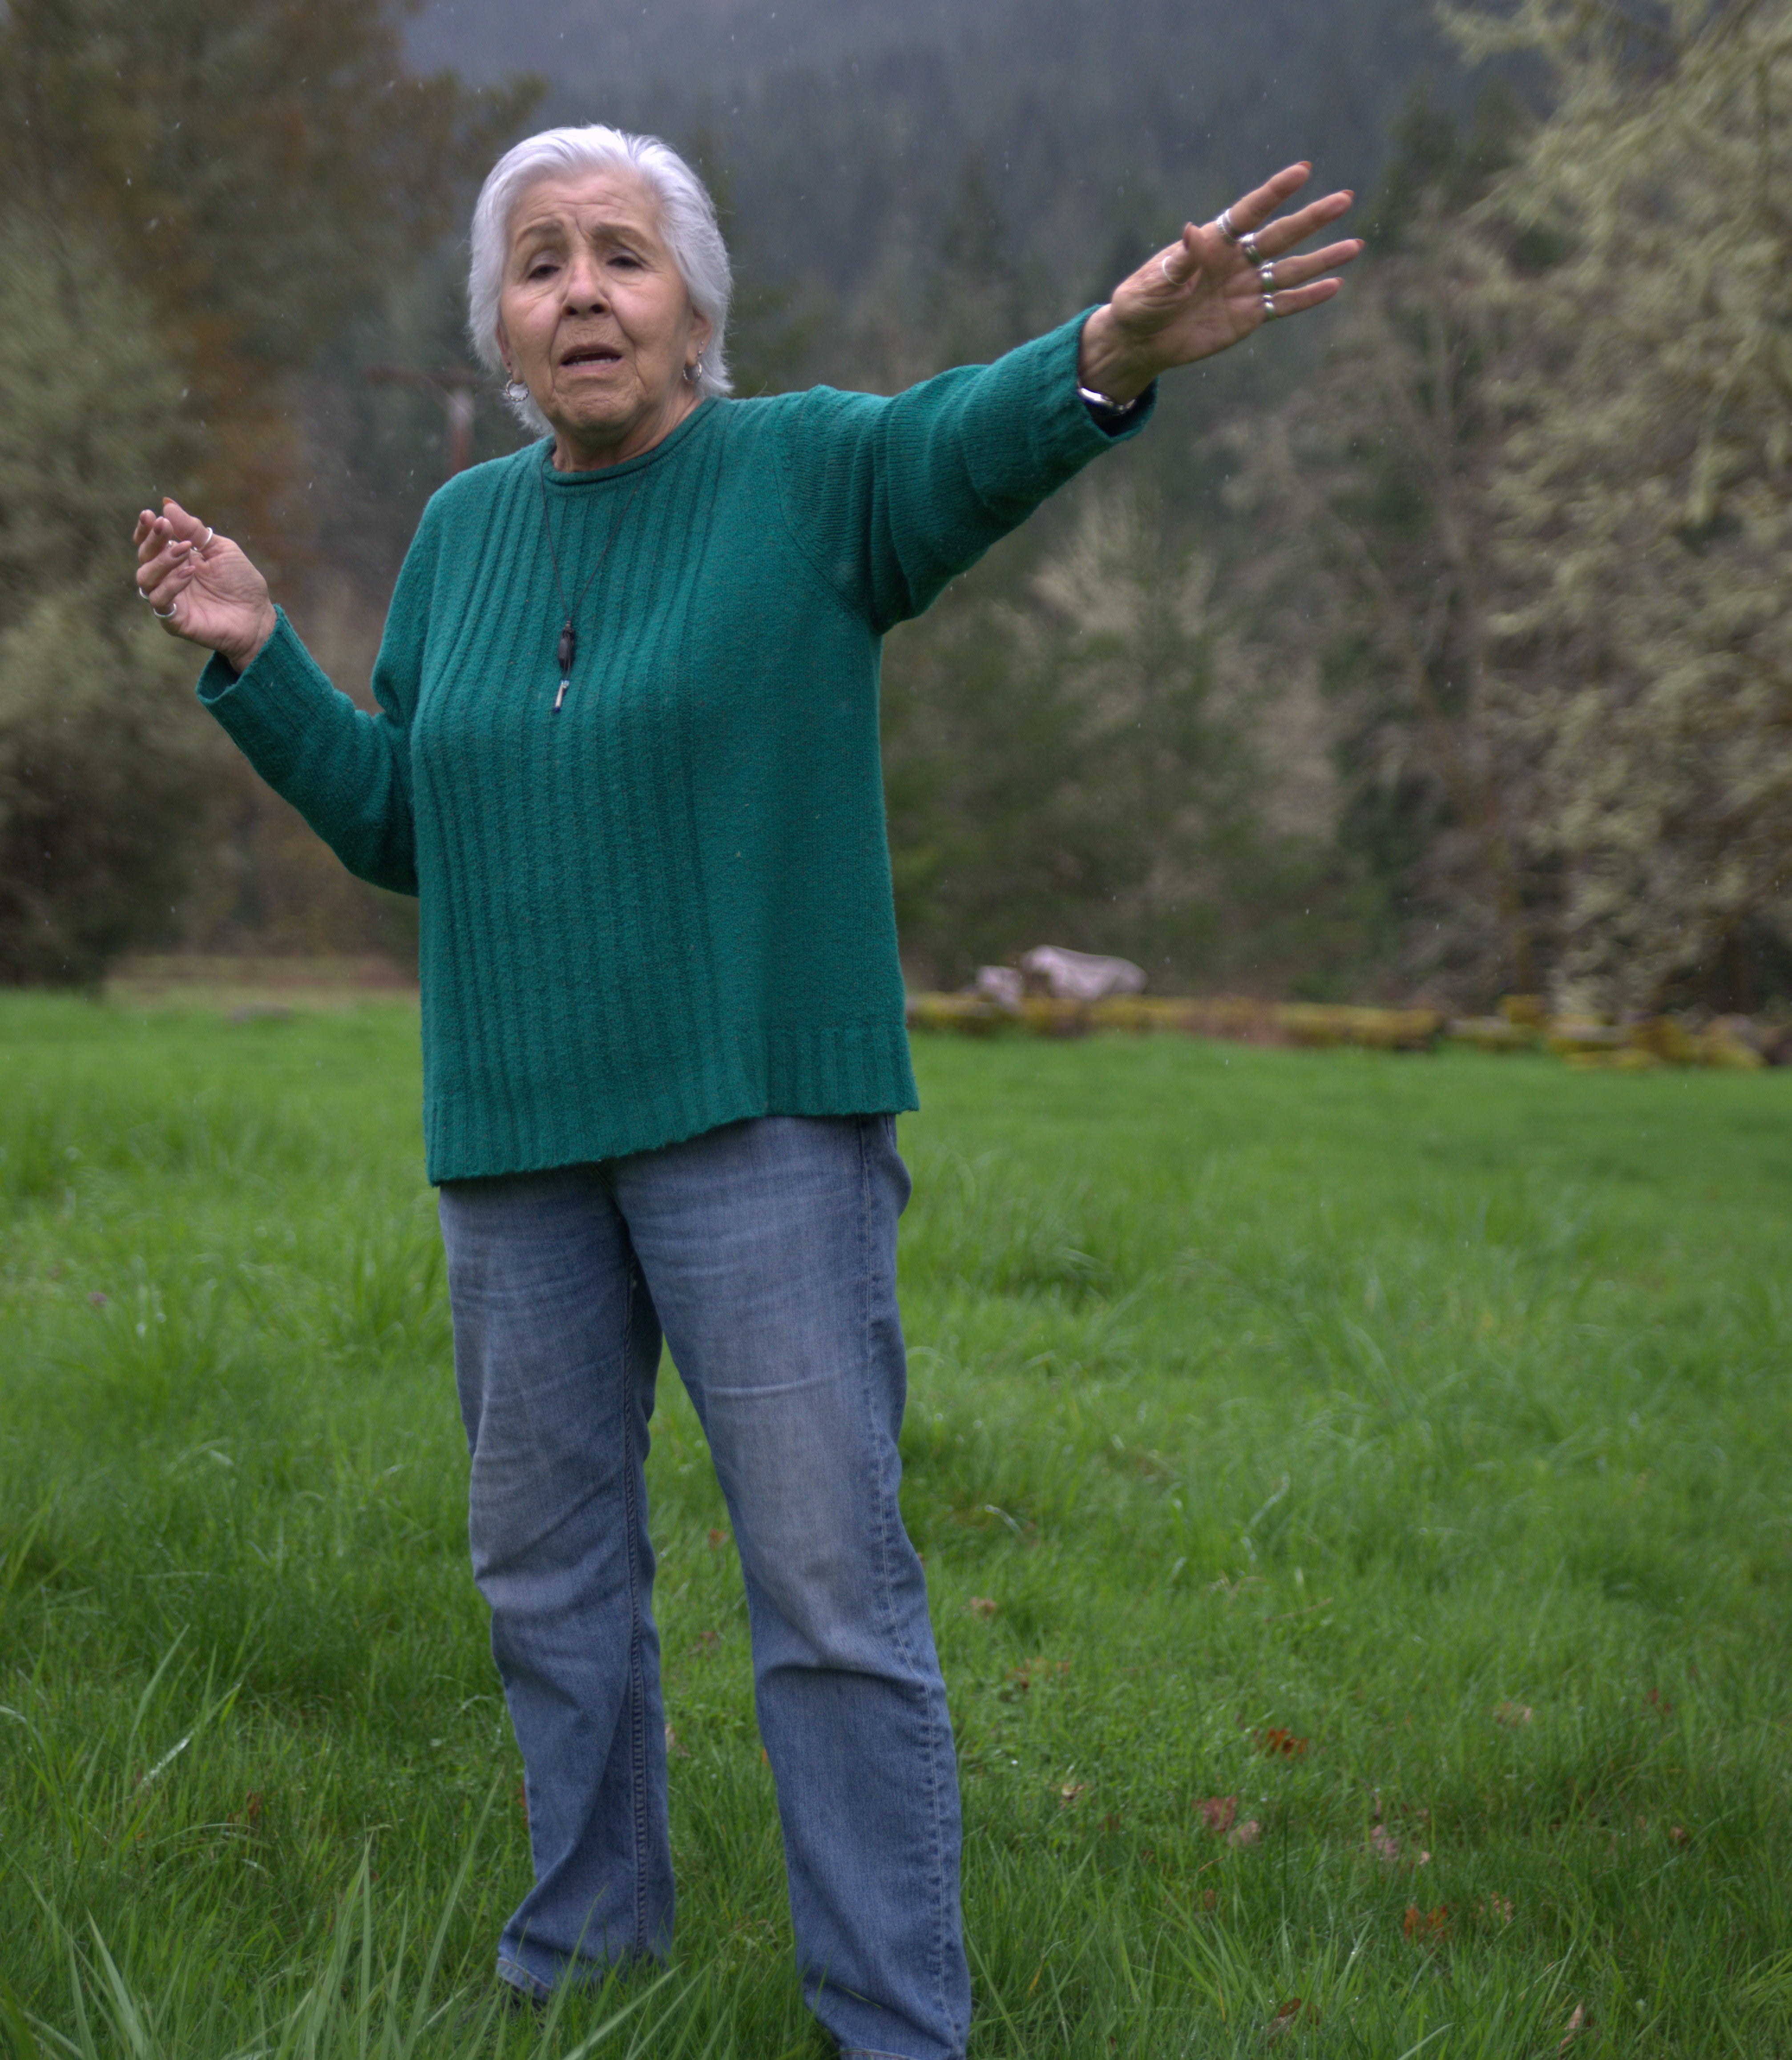 Esther Stutzman telling a story in a field.